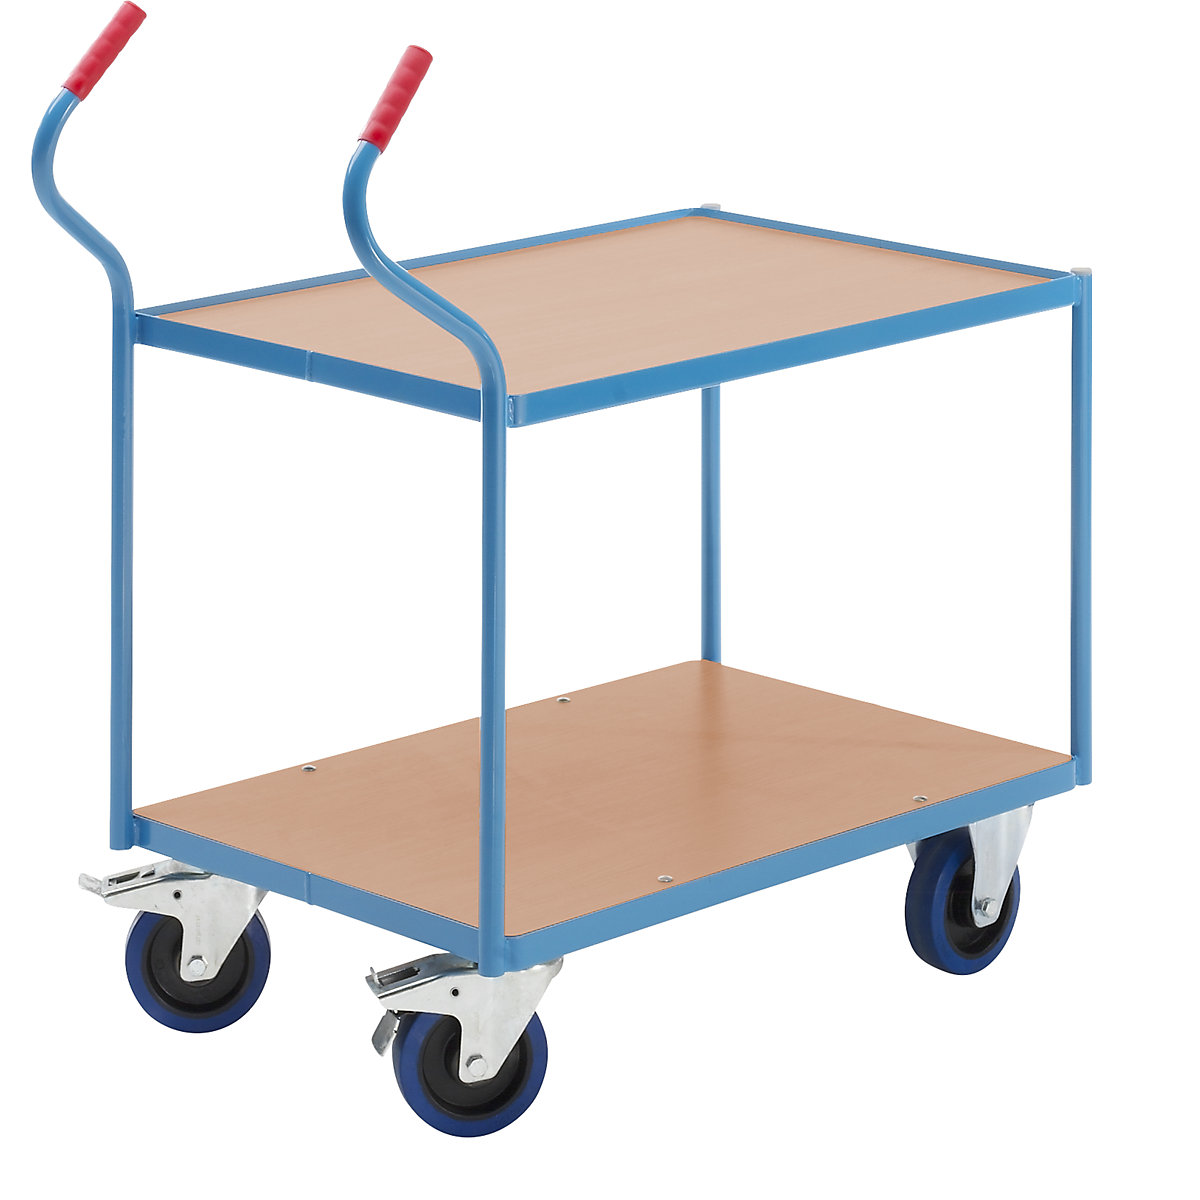 Industrial table trolley – eurokraft pro, fully elastic tyres, non-marking, shelf heights 235 / 765 mm-1